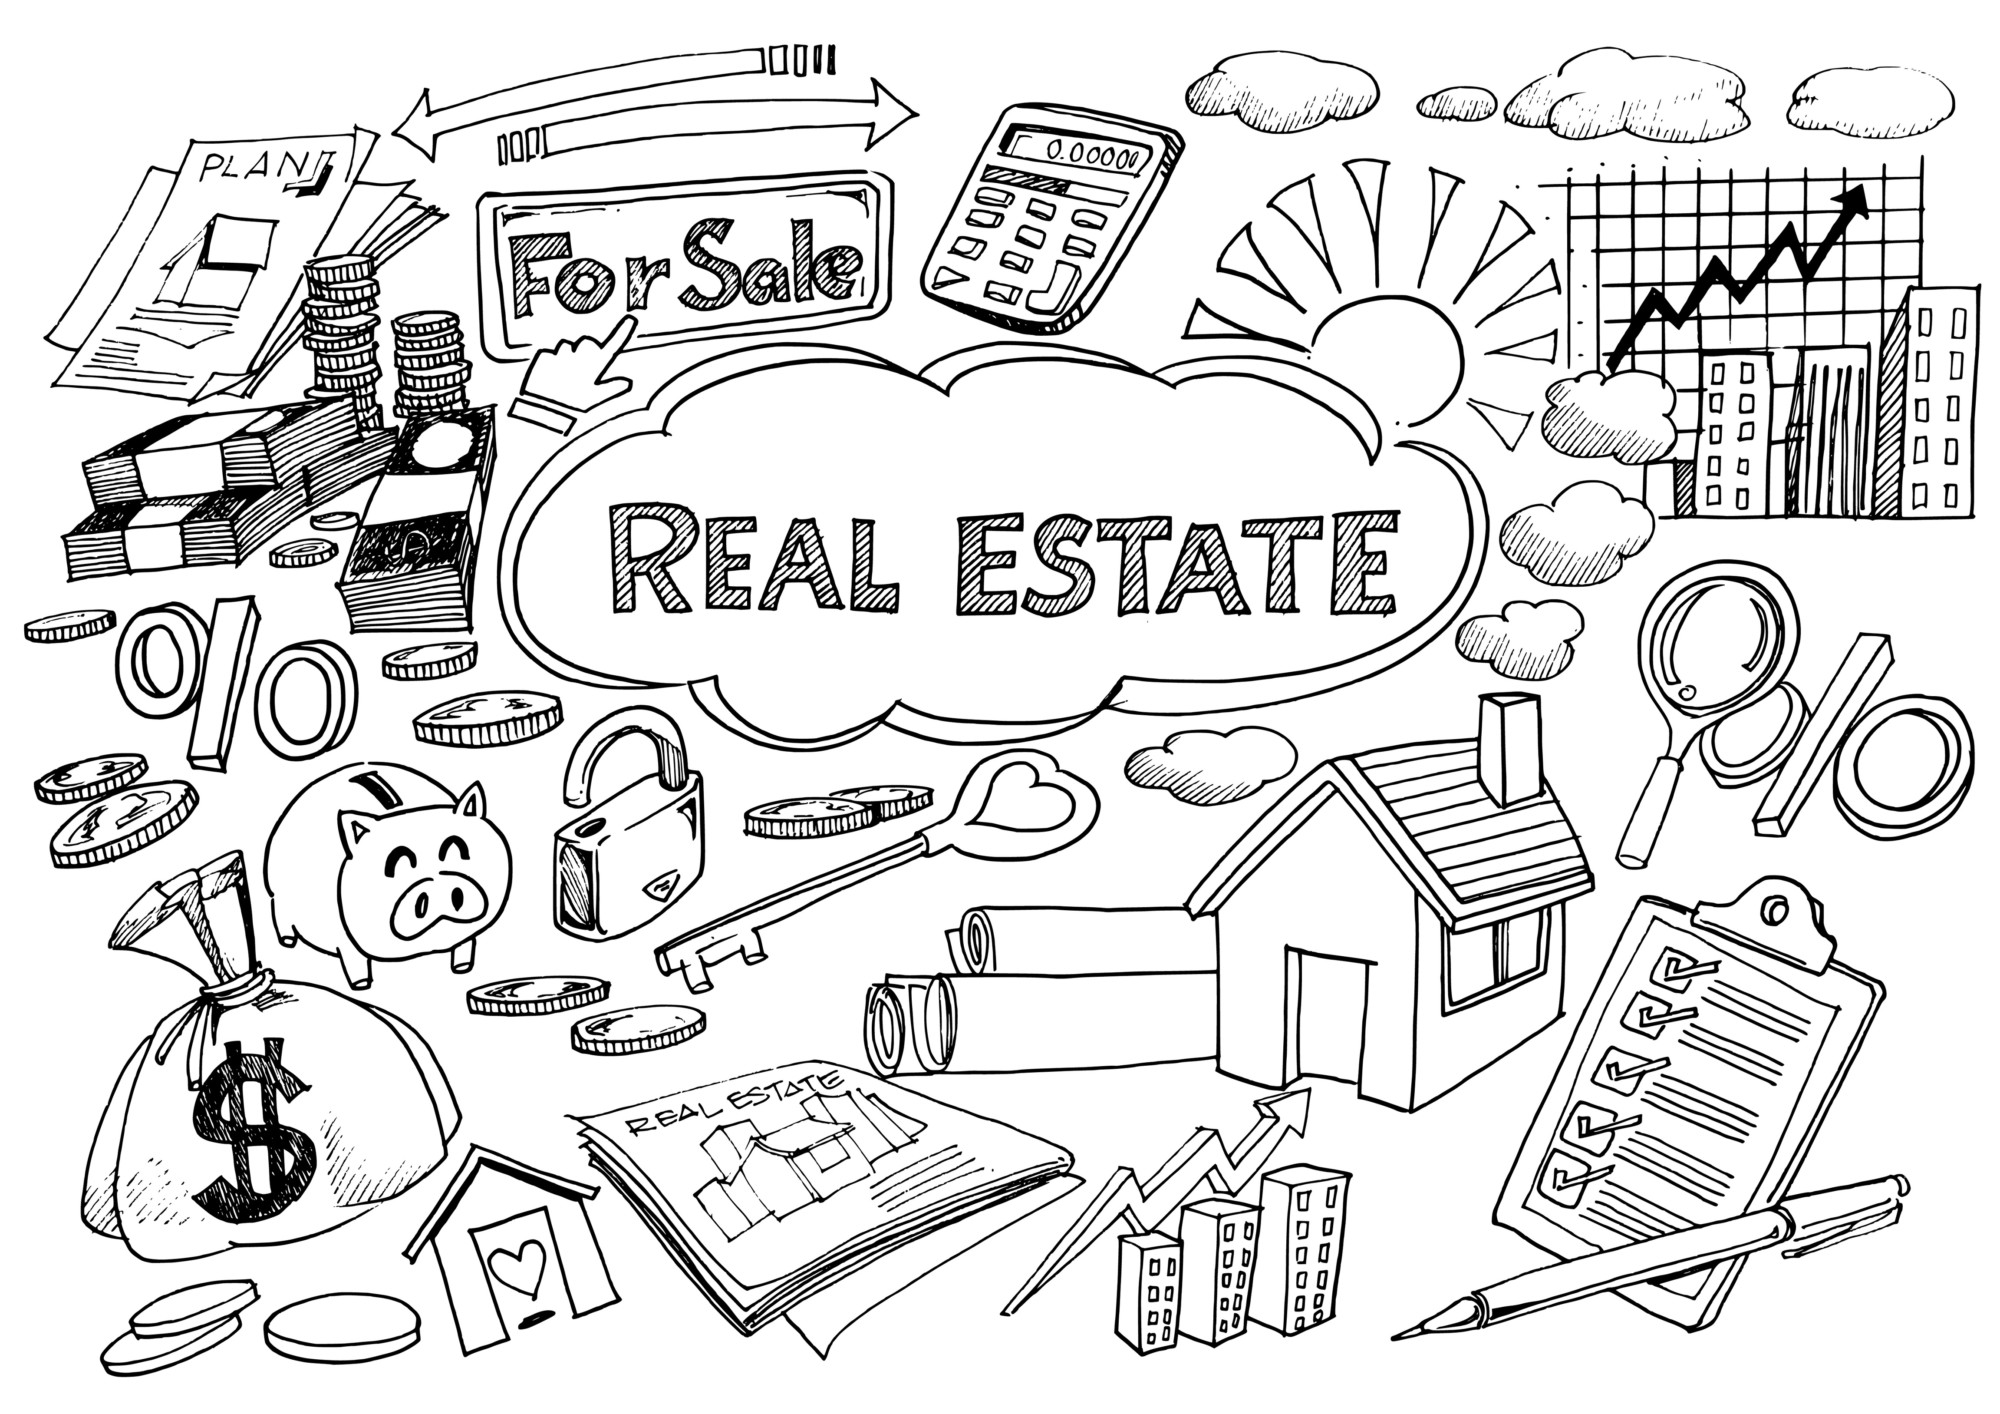 Terms and Acronyms Every Real Estate Investor Needs to Know